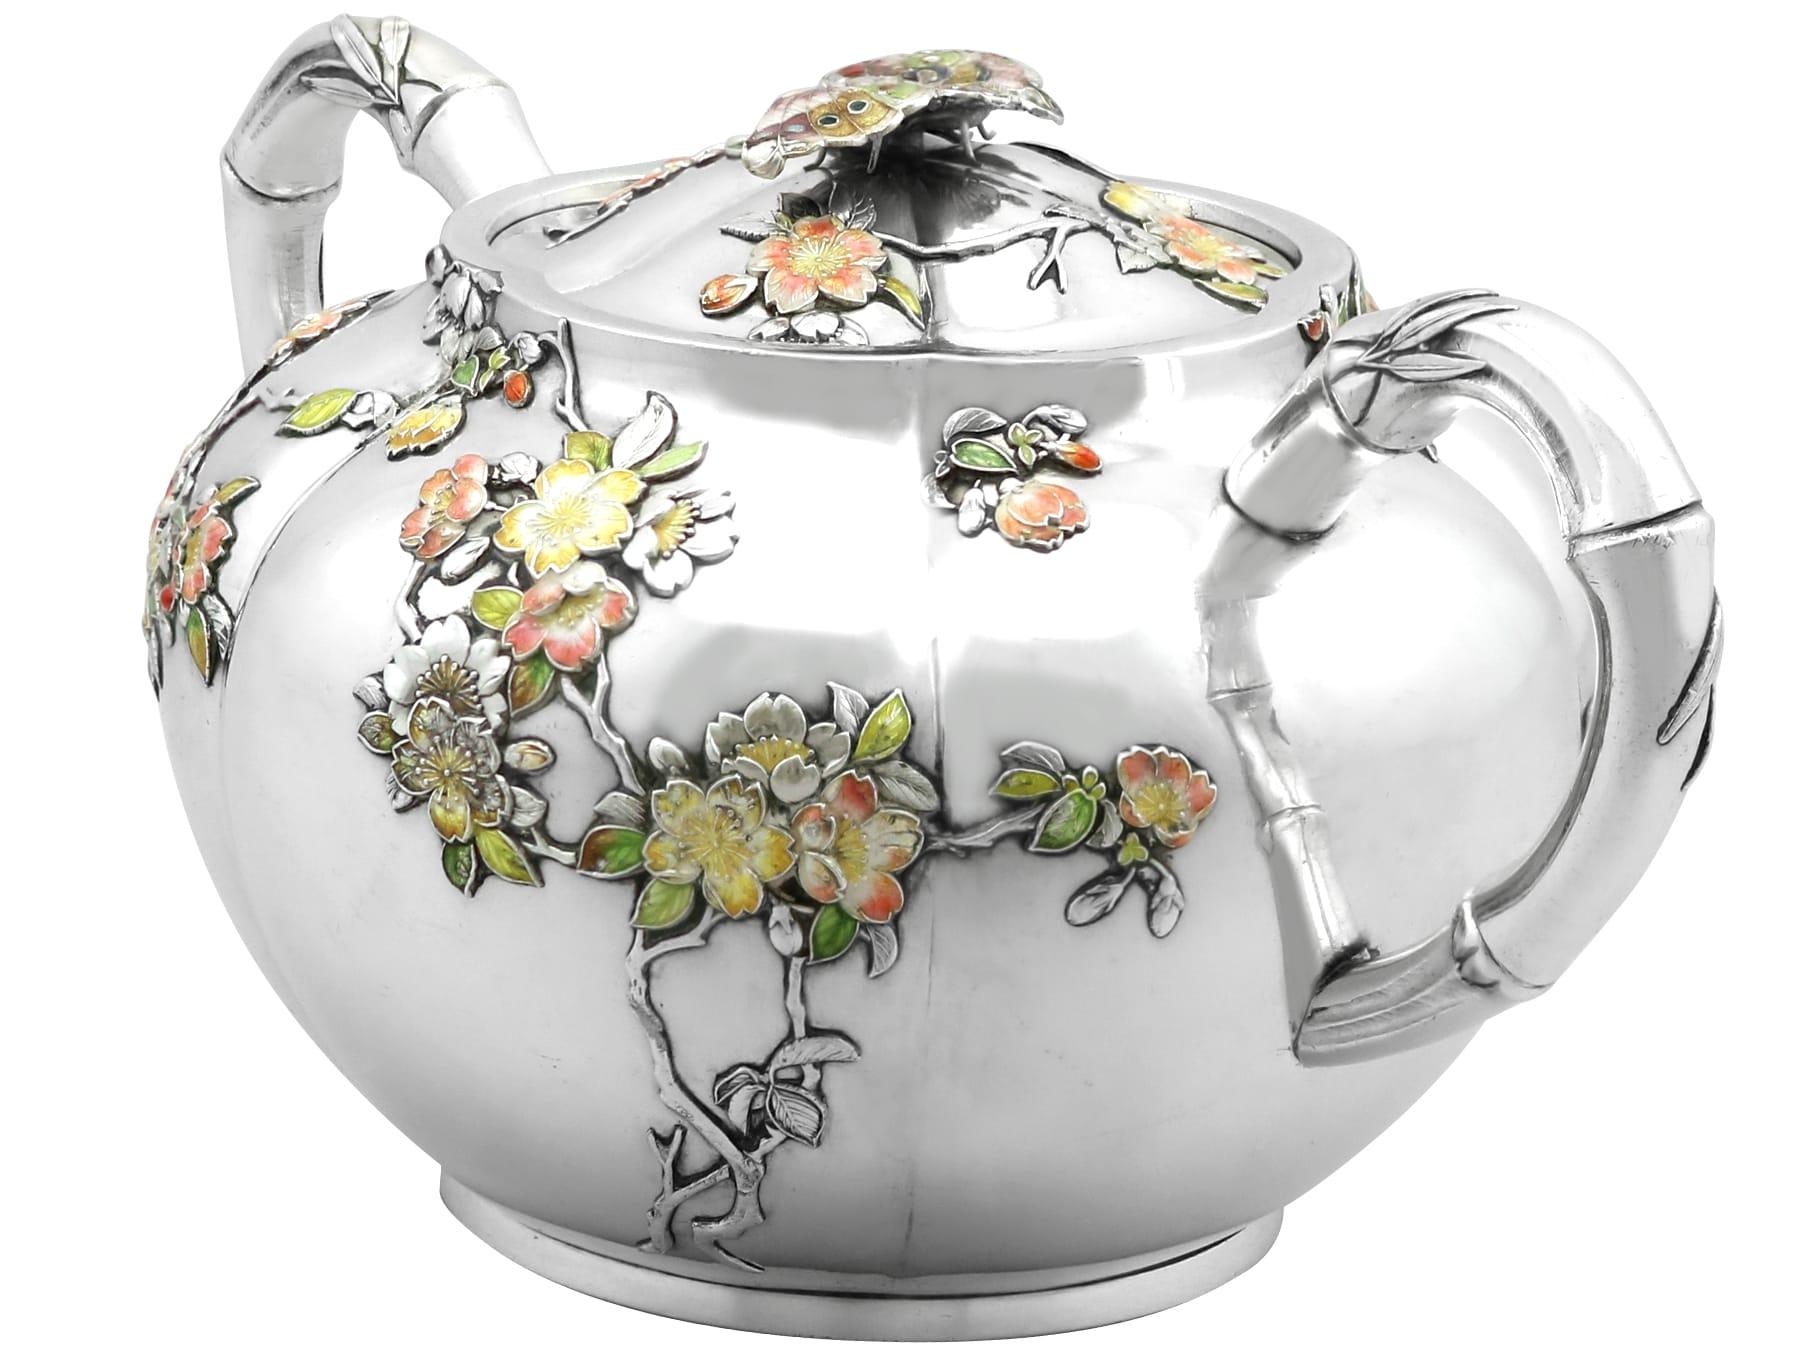 Antique Japanese Silver and Enamel Cream Jug and Sugar Bowl Circa 1890 For Sale 3